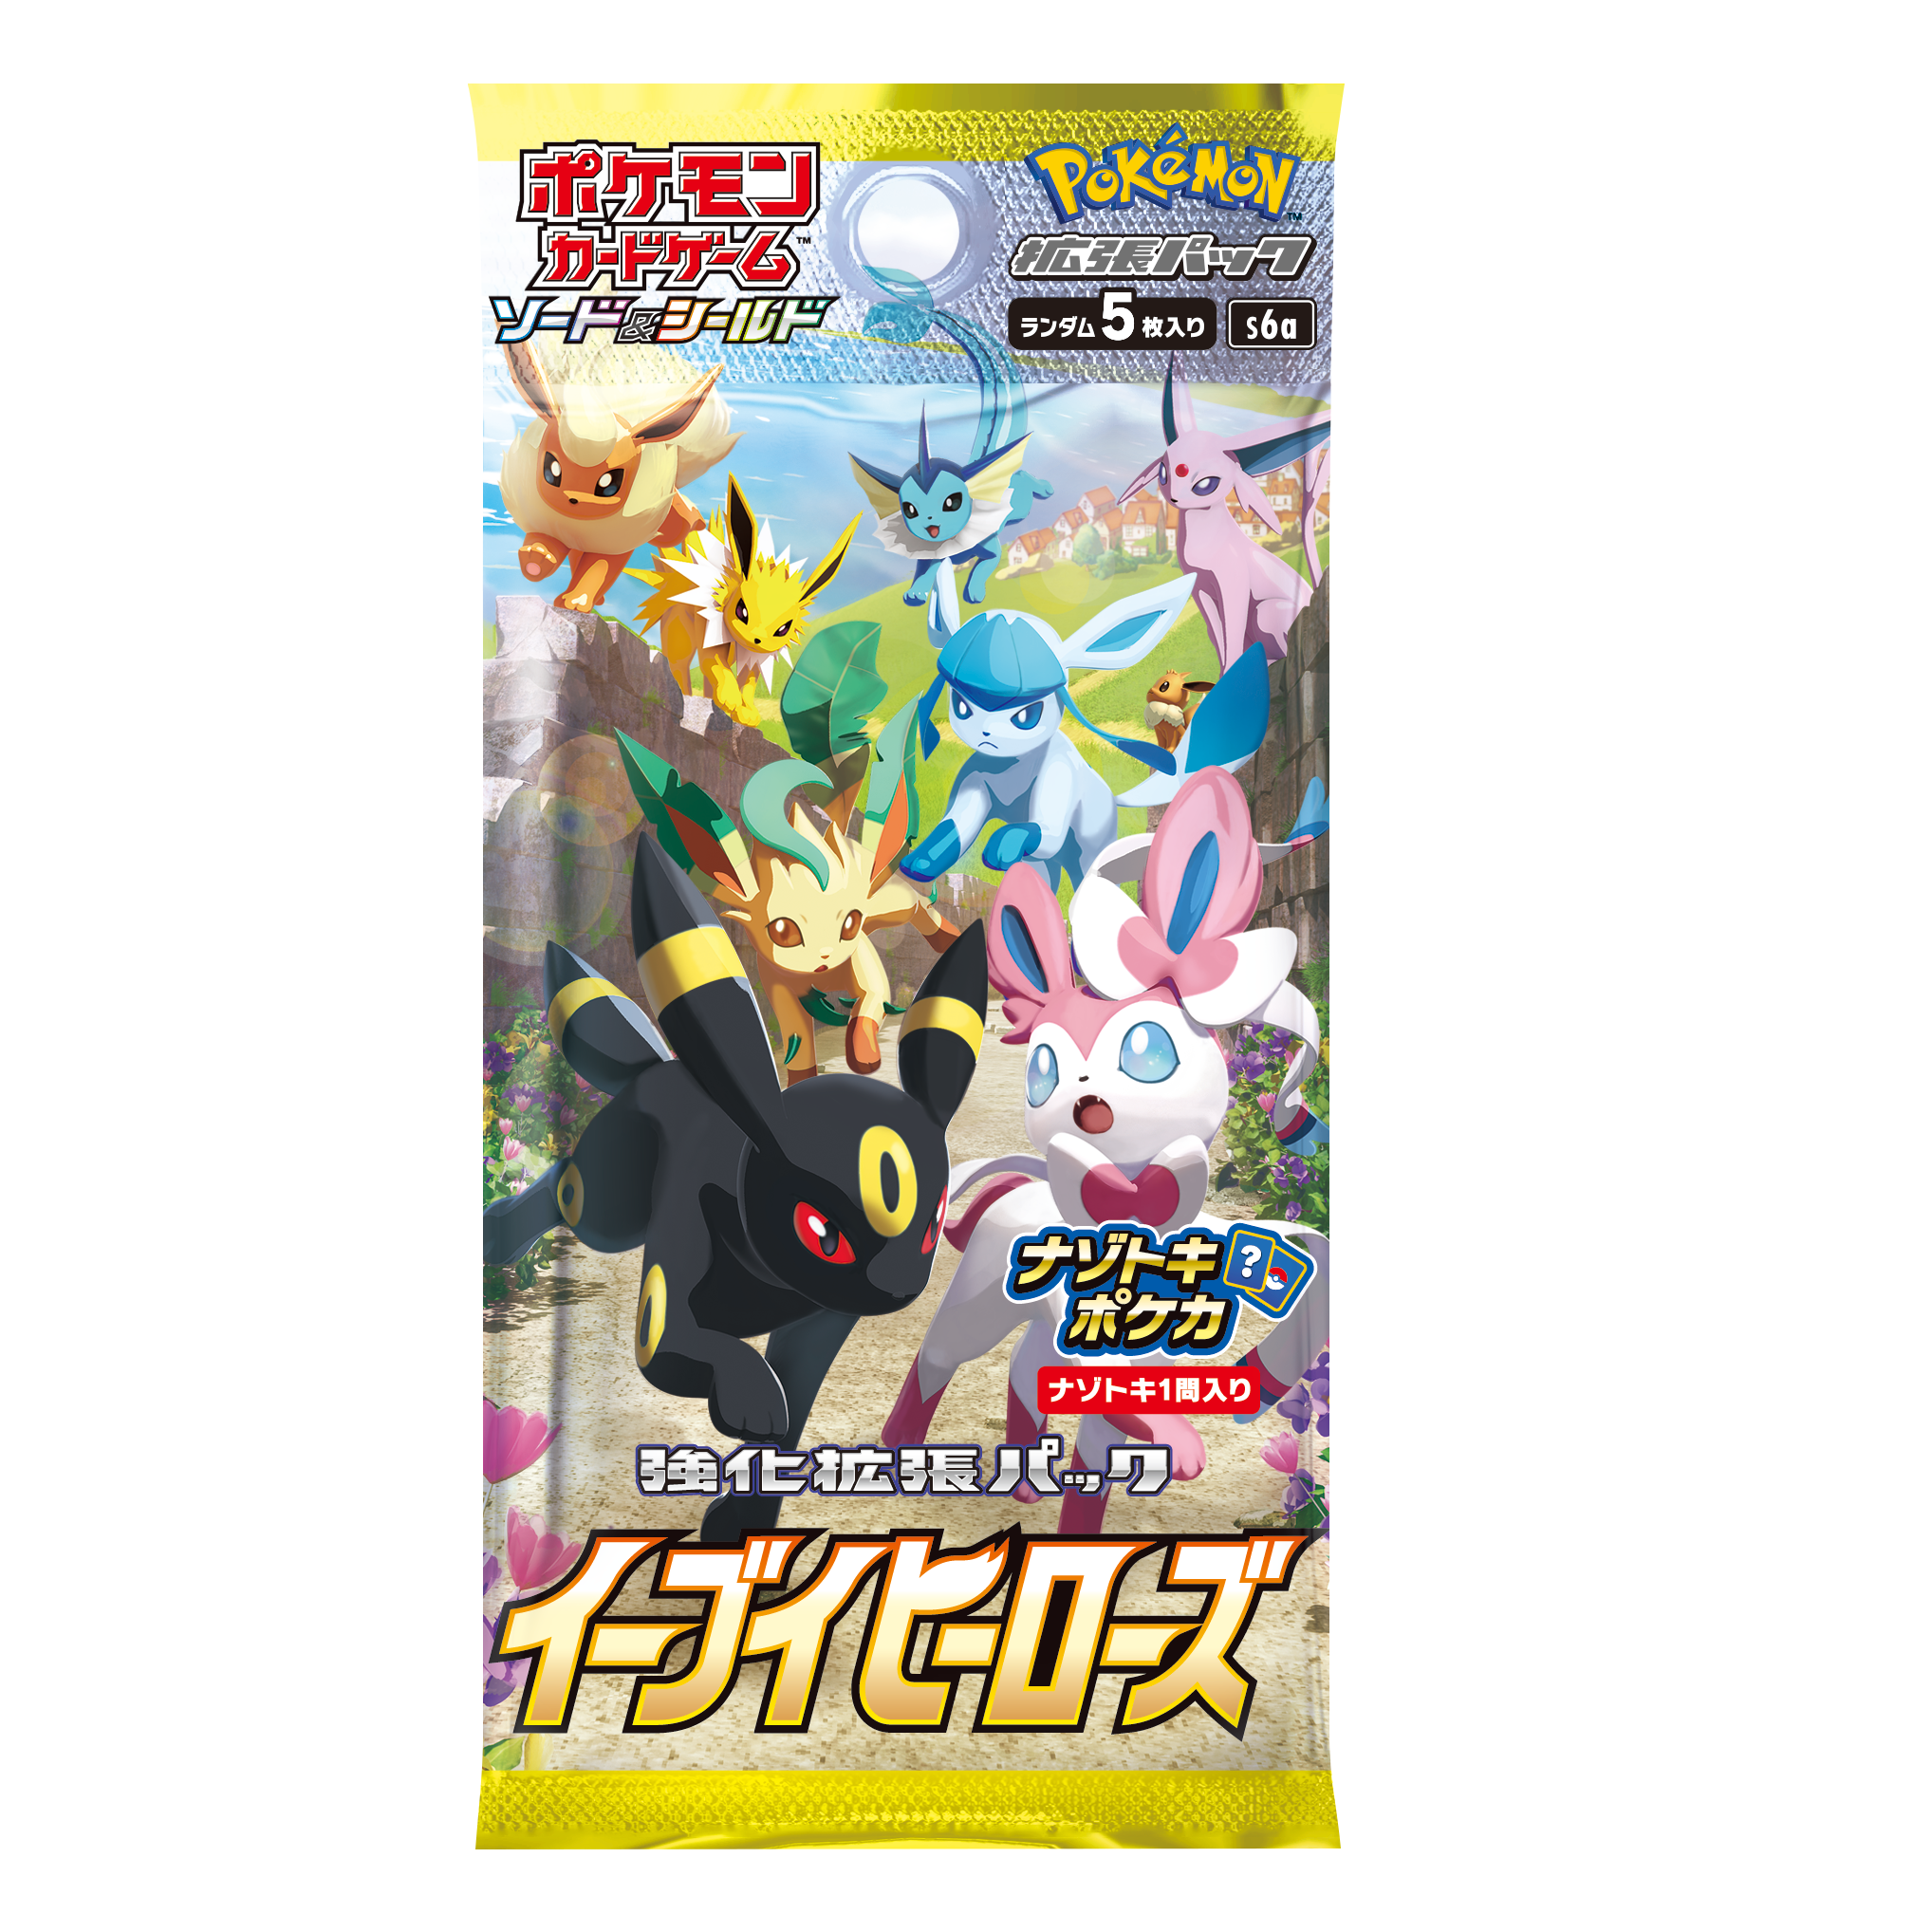 Pokémon Card Game - Sword and Shield - "Eevee Heroes" [S6a] (japanese booster)--0